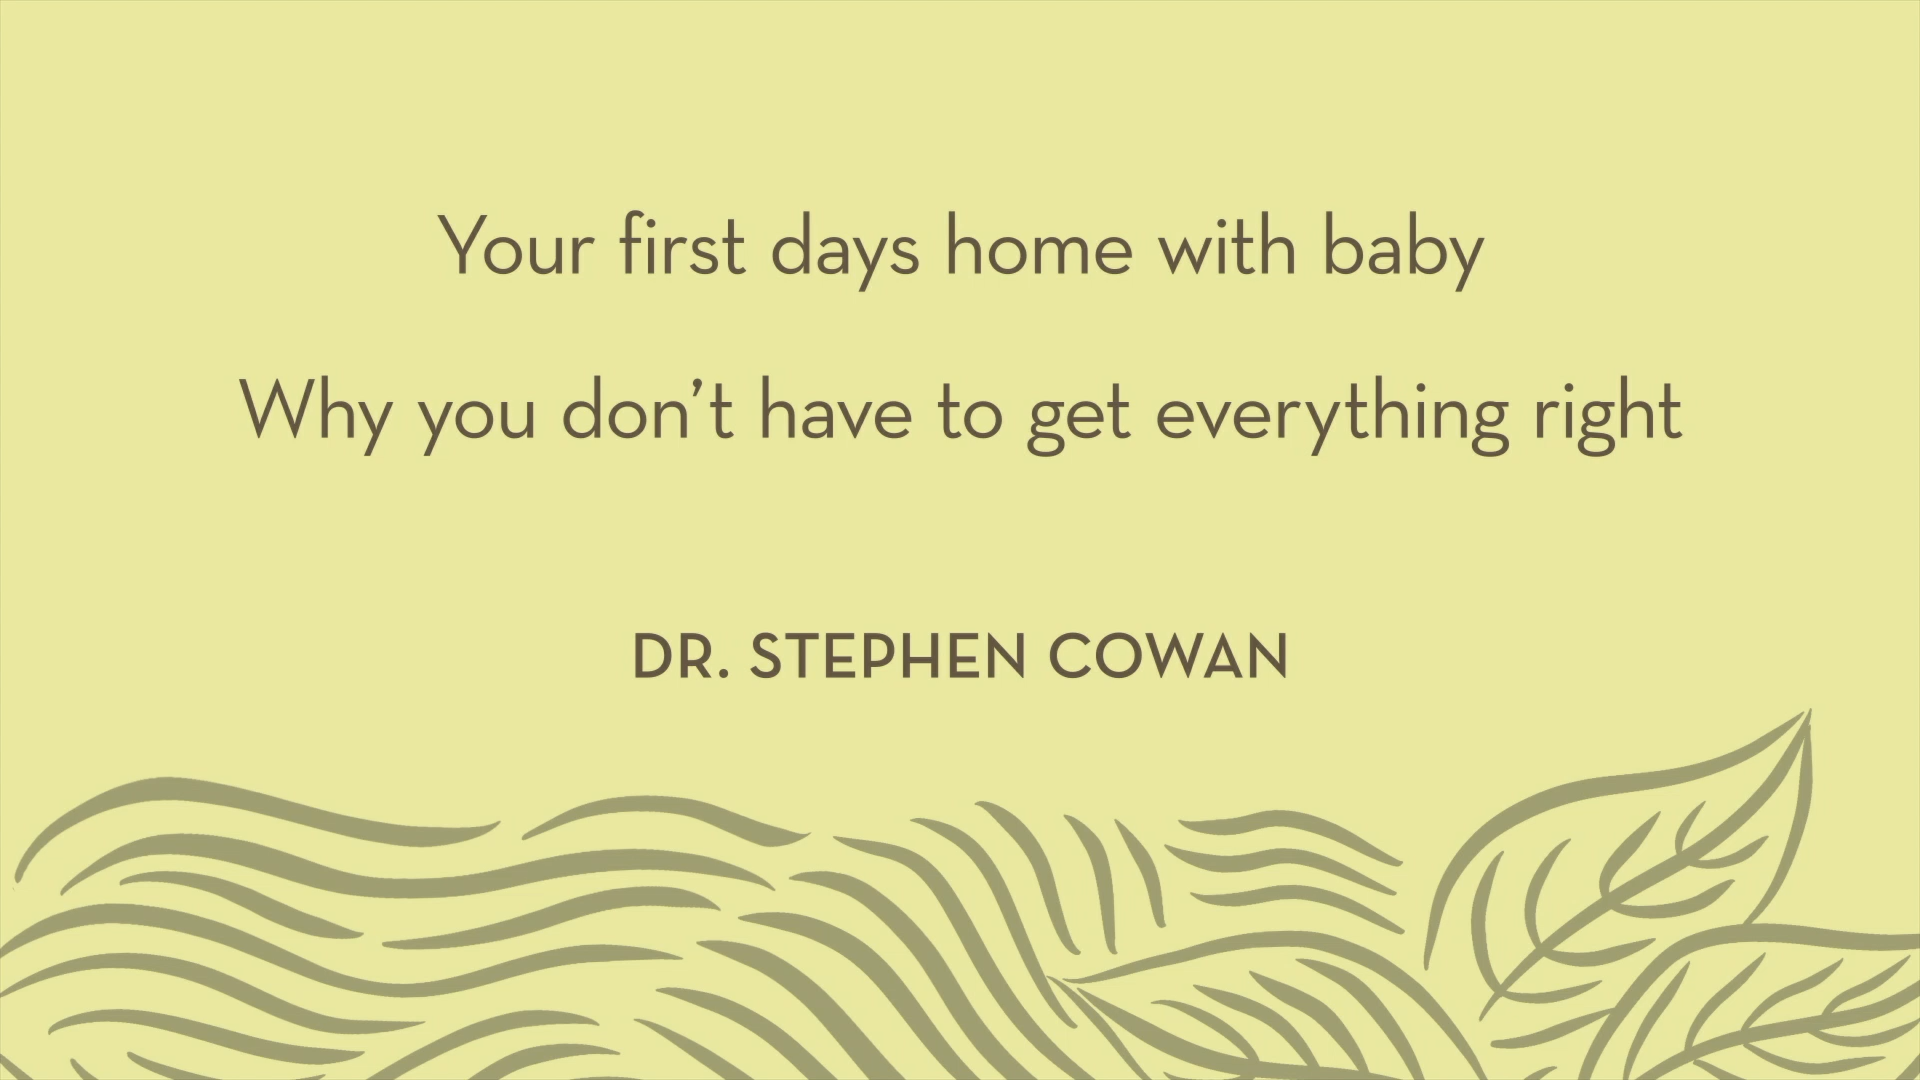 Dr. Cowan  | Your first days home with baby and why you don't have to get everything right